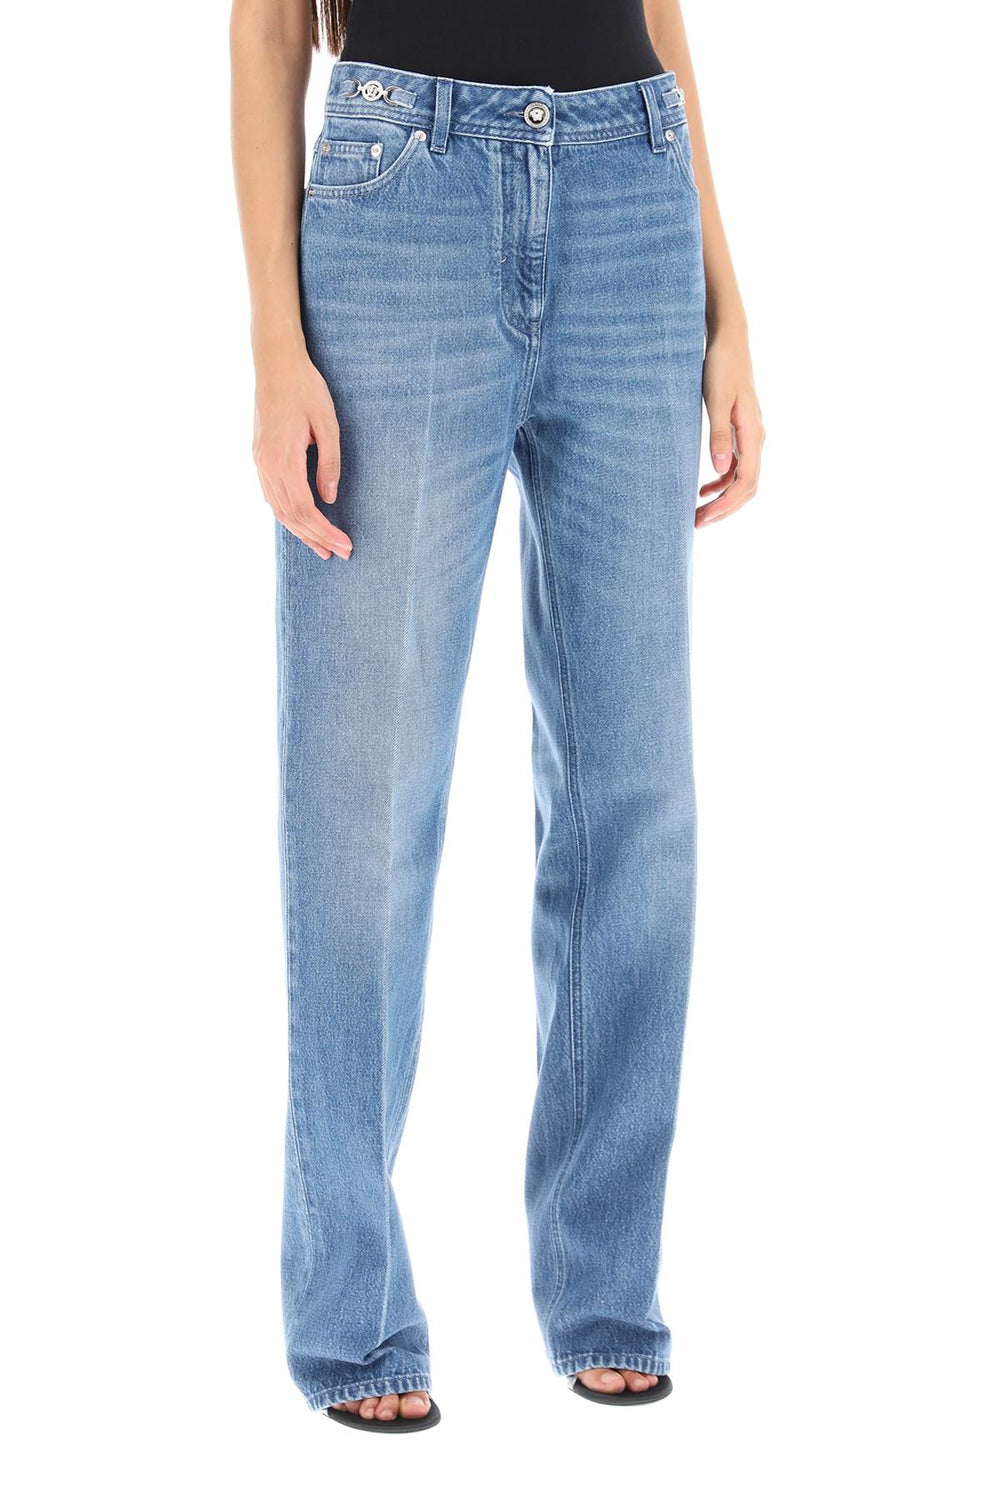 boyfriend jeans with tailored crease-1